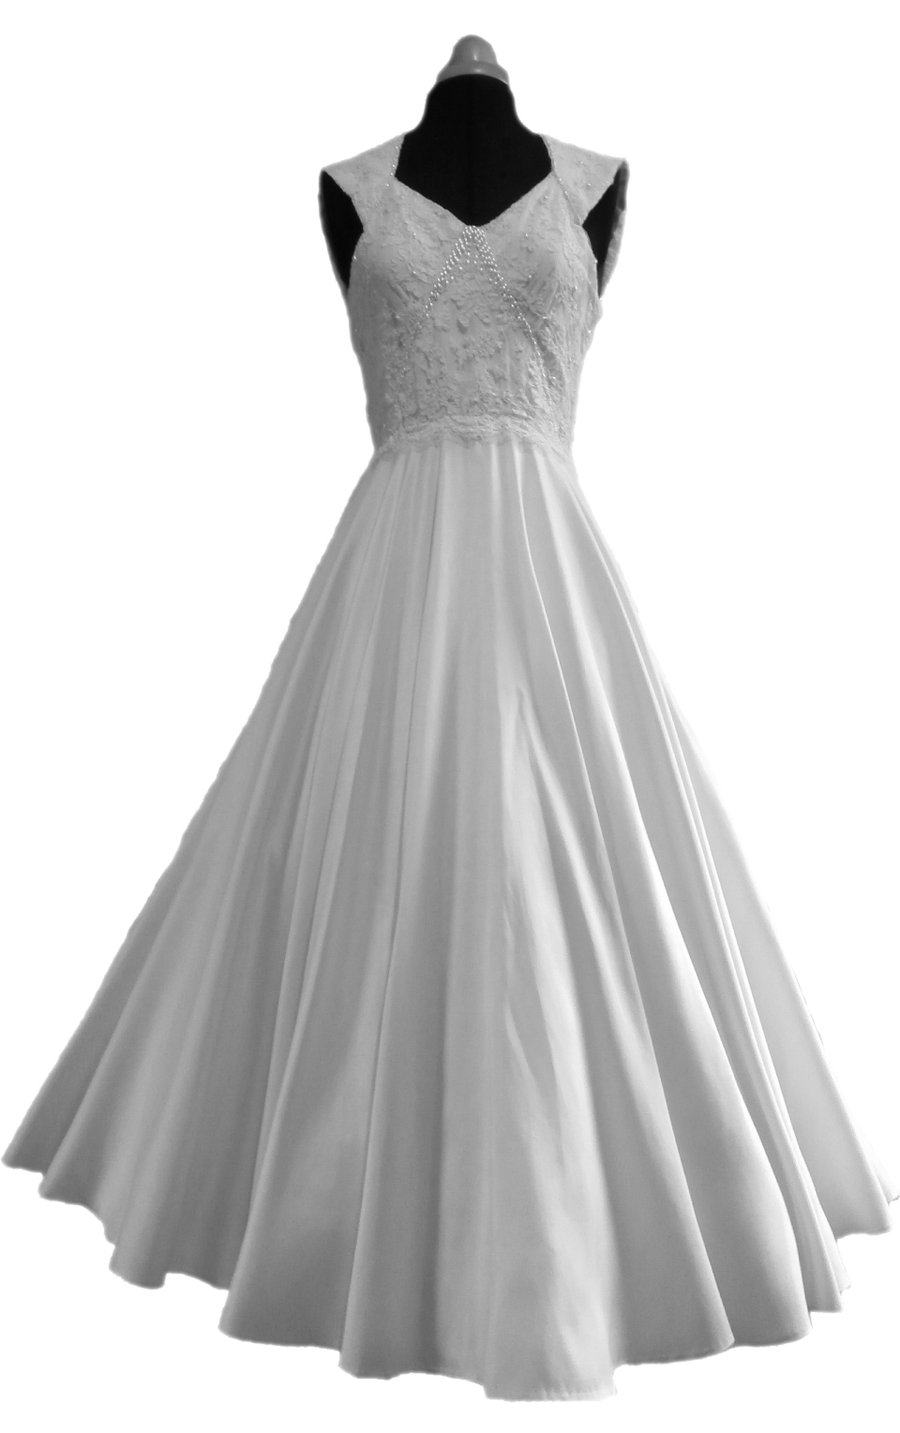 Hand beaded ivory silk and lace wedding dress